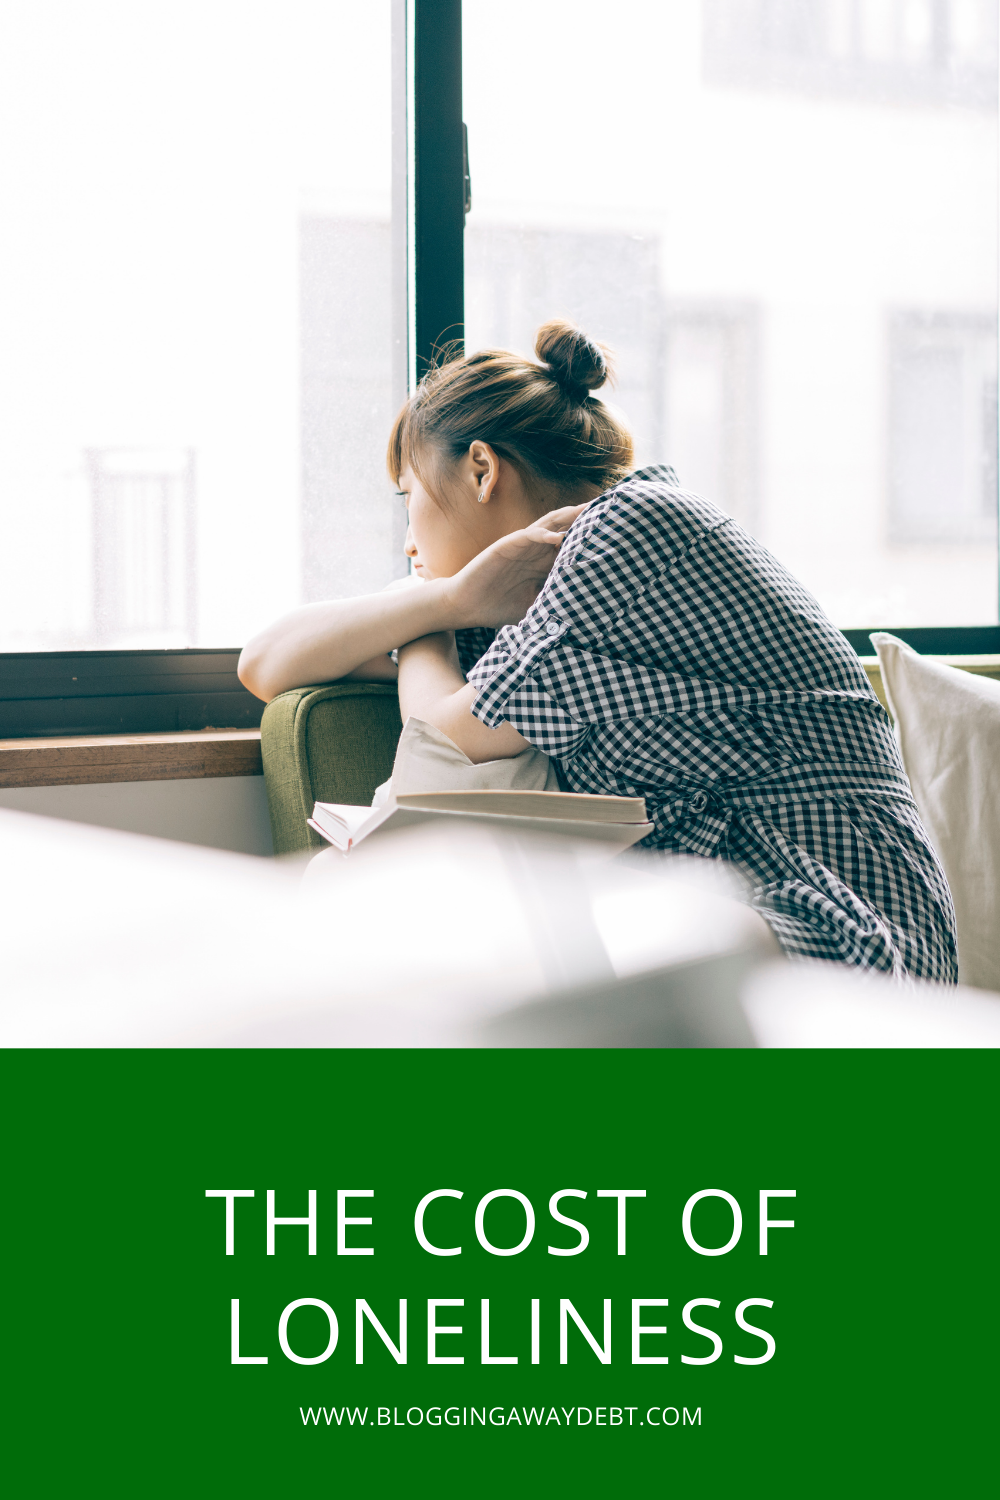 The Cost of Loneliness